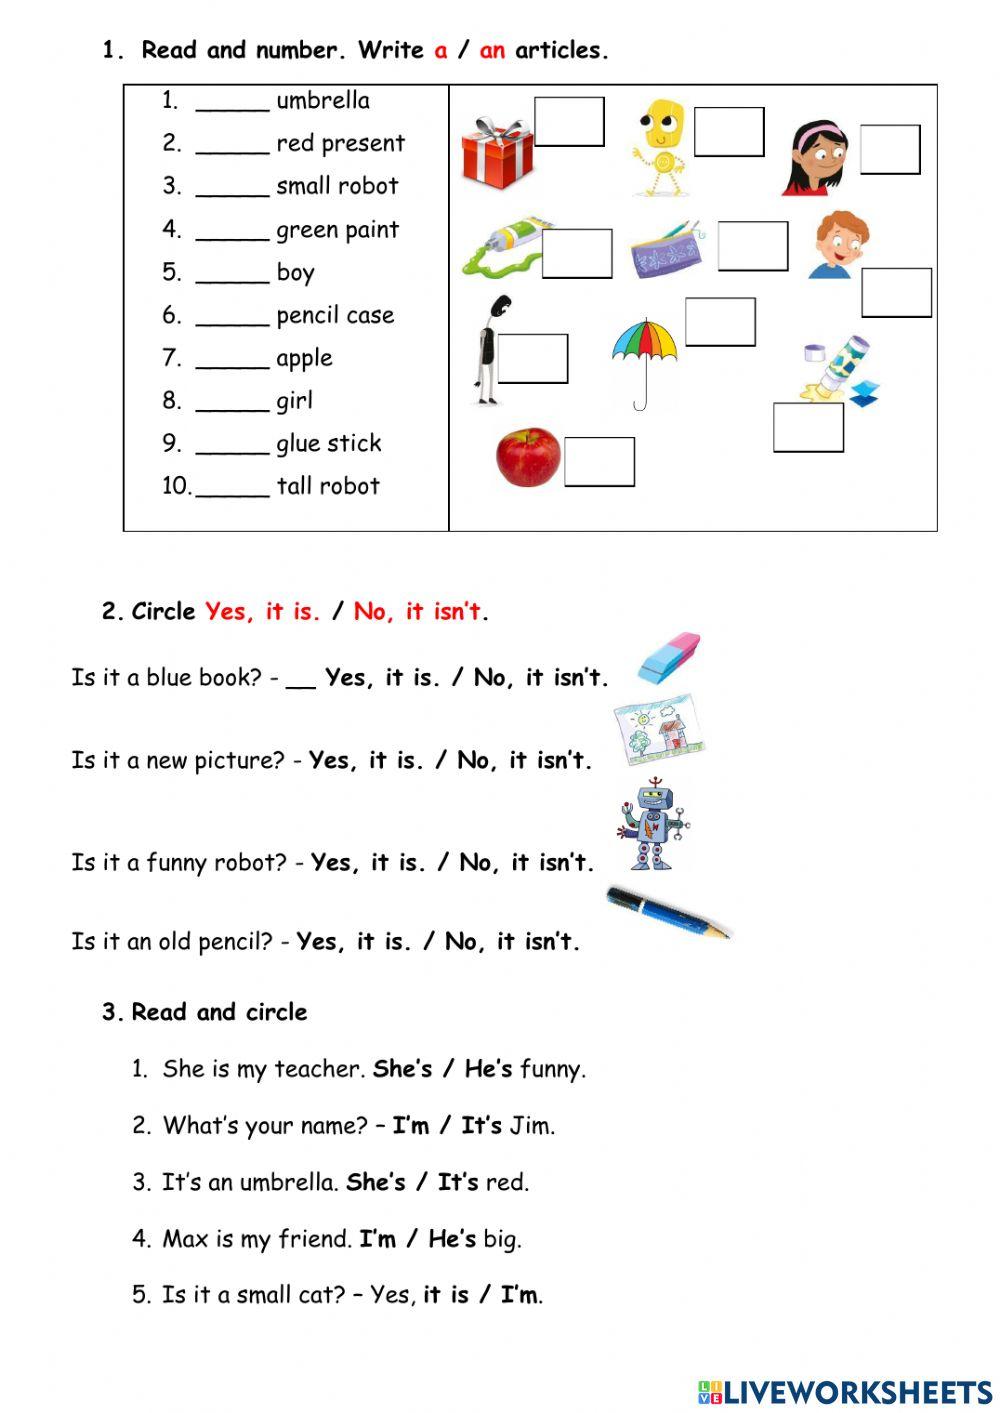 Articles,verb - to be-